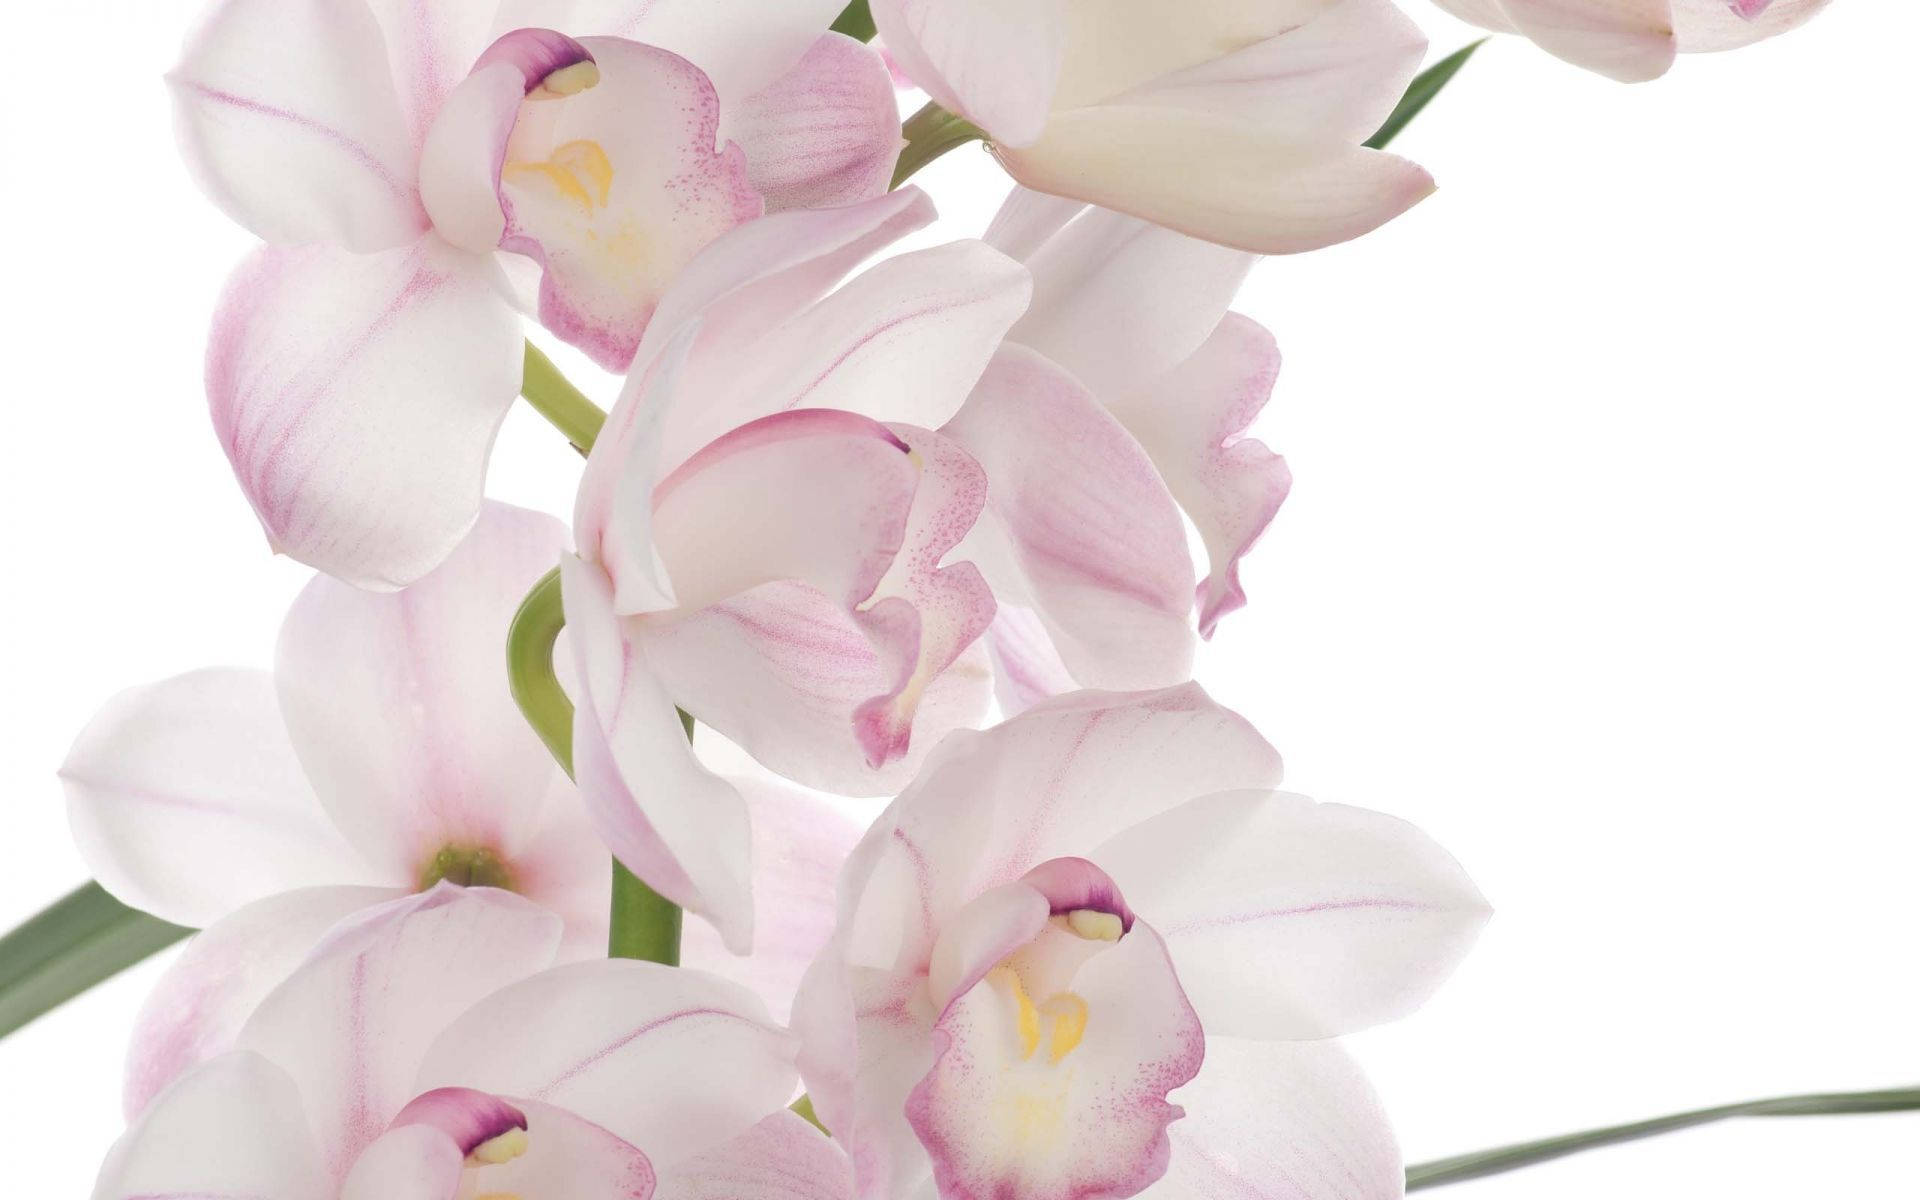 White Orchid With Pink Edge Petals Background